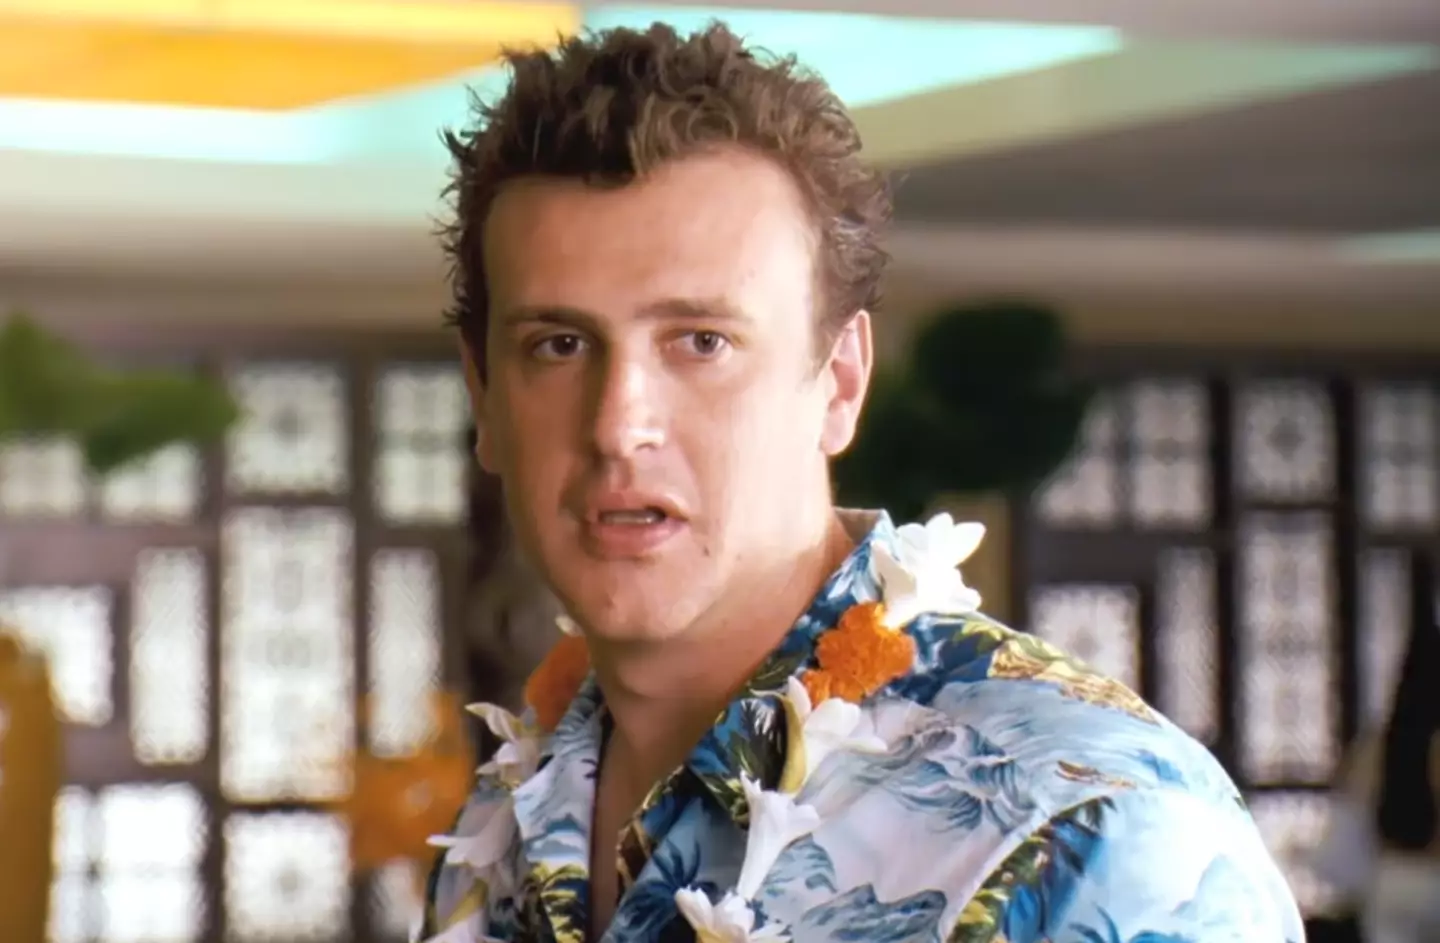 Jason Segal wrote Forgetting Sarah Marshall, which was released in 2008.